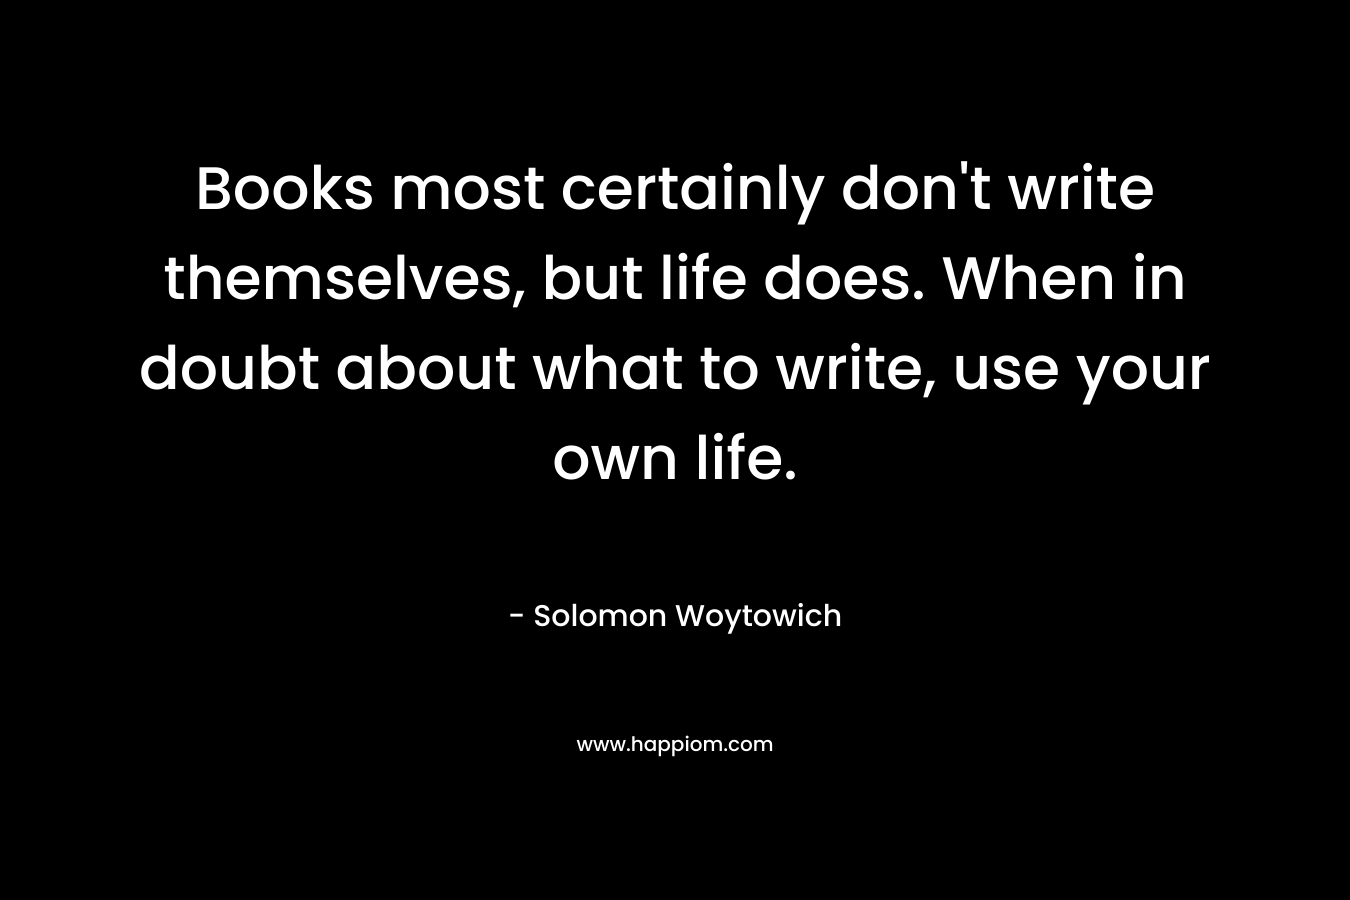 Books most certainly don't write themselves, but life does. When in doubt about what to write, use your own life.